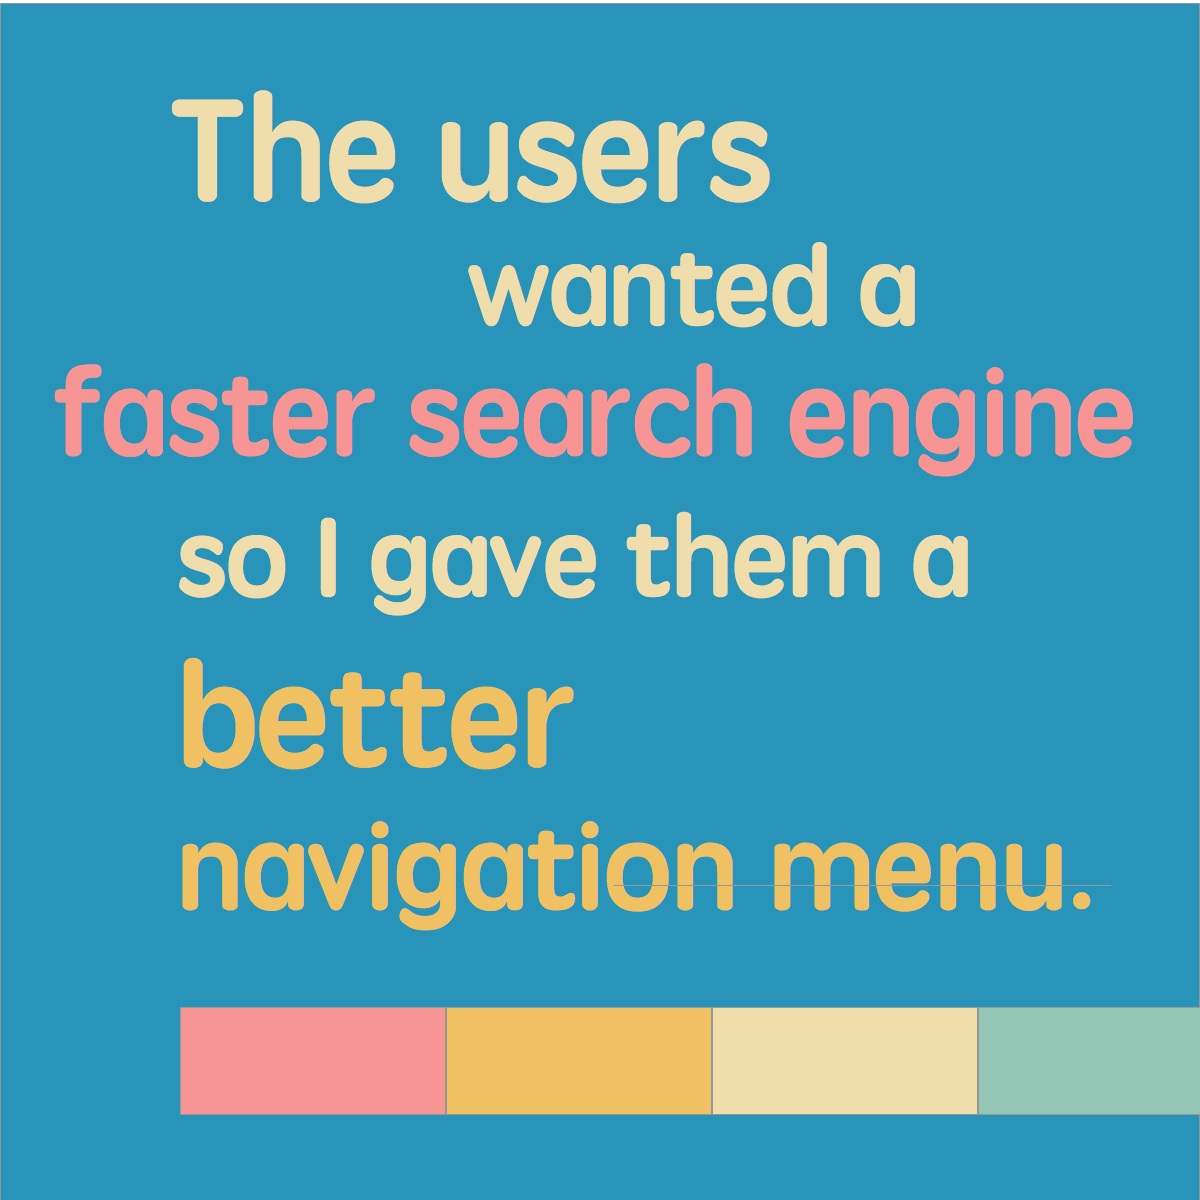 The users wanted a faster search engine so I gave them a better navigation menu.